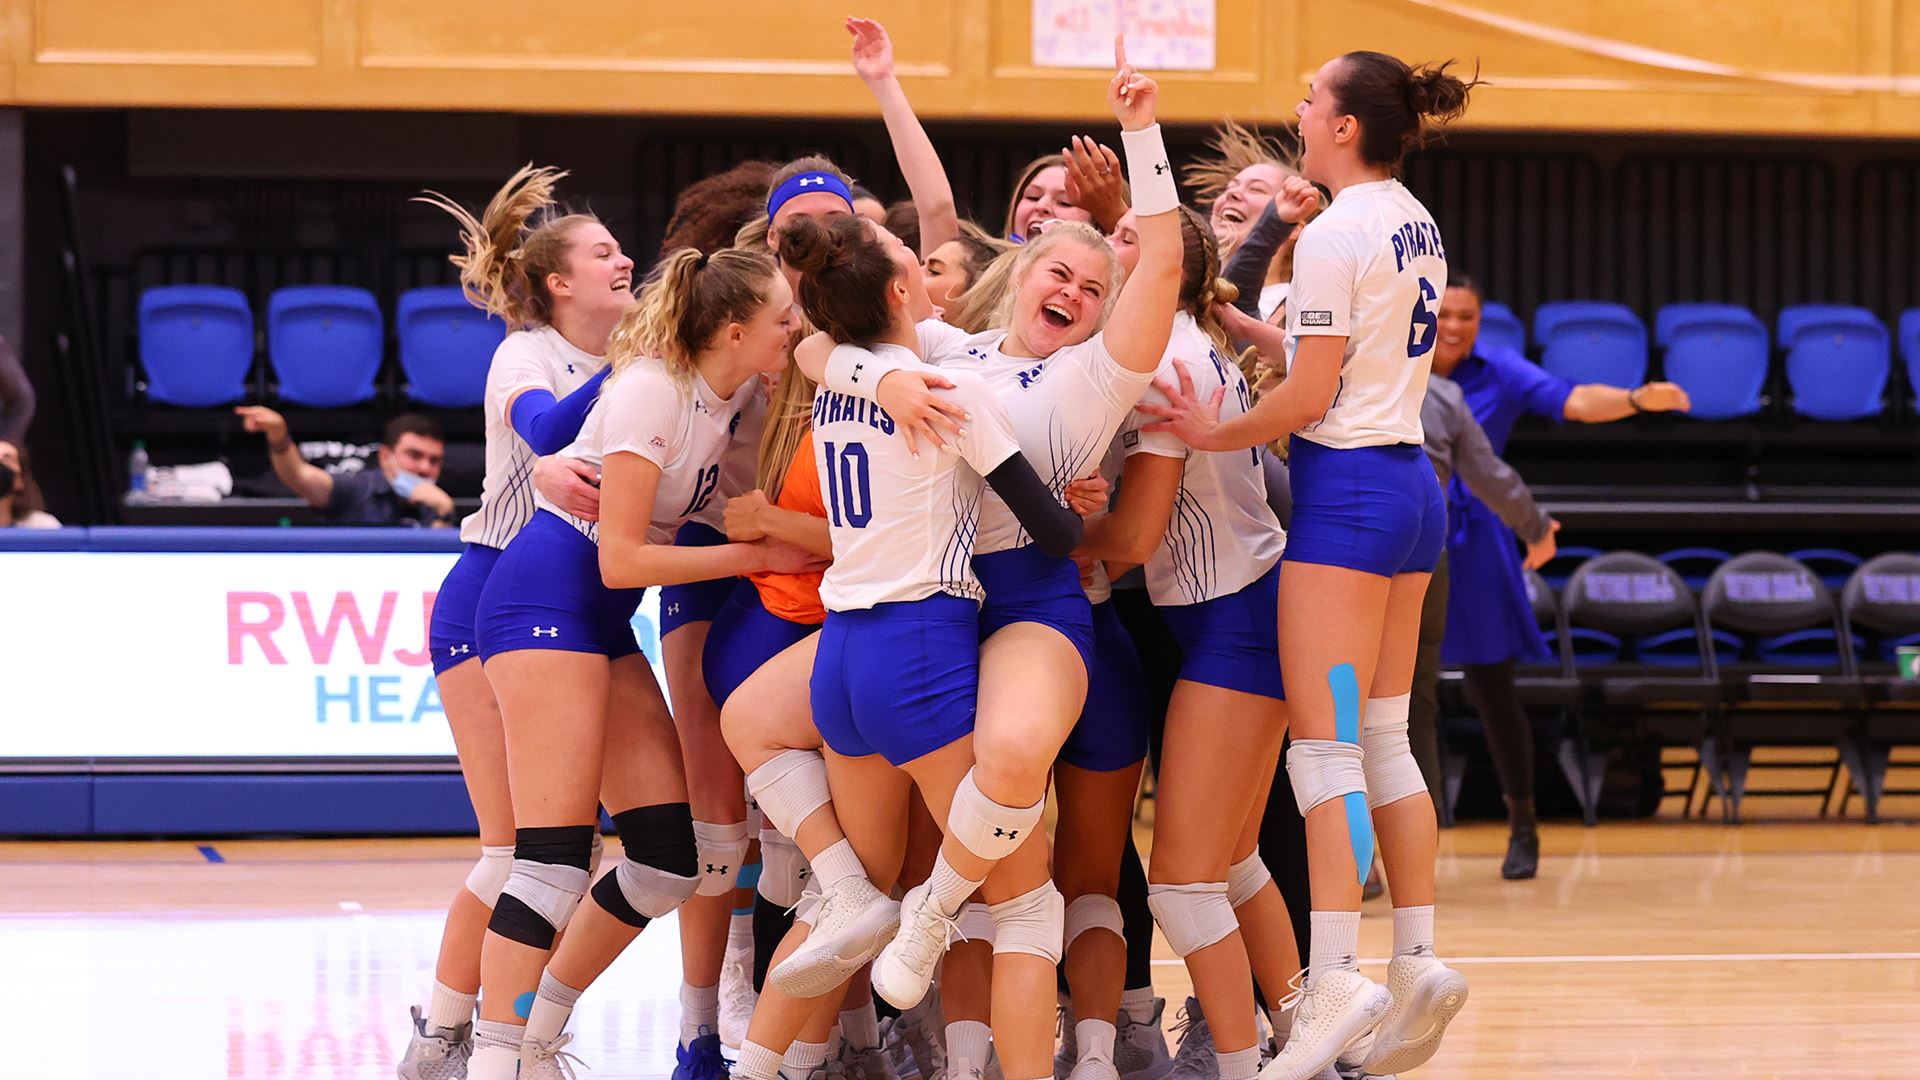 The Seton Hall women's volleyball team celebrates after winning a match against UConn on Senior Night.